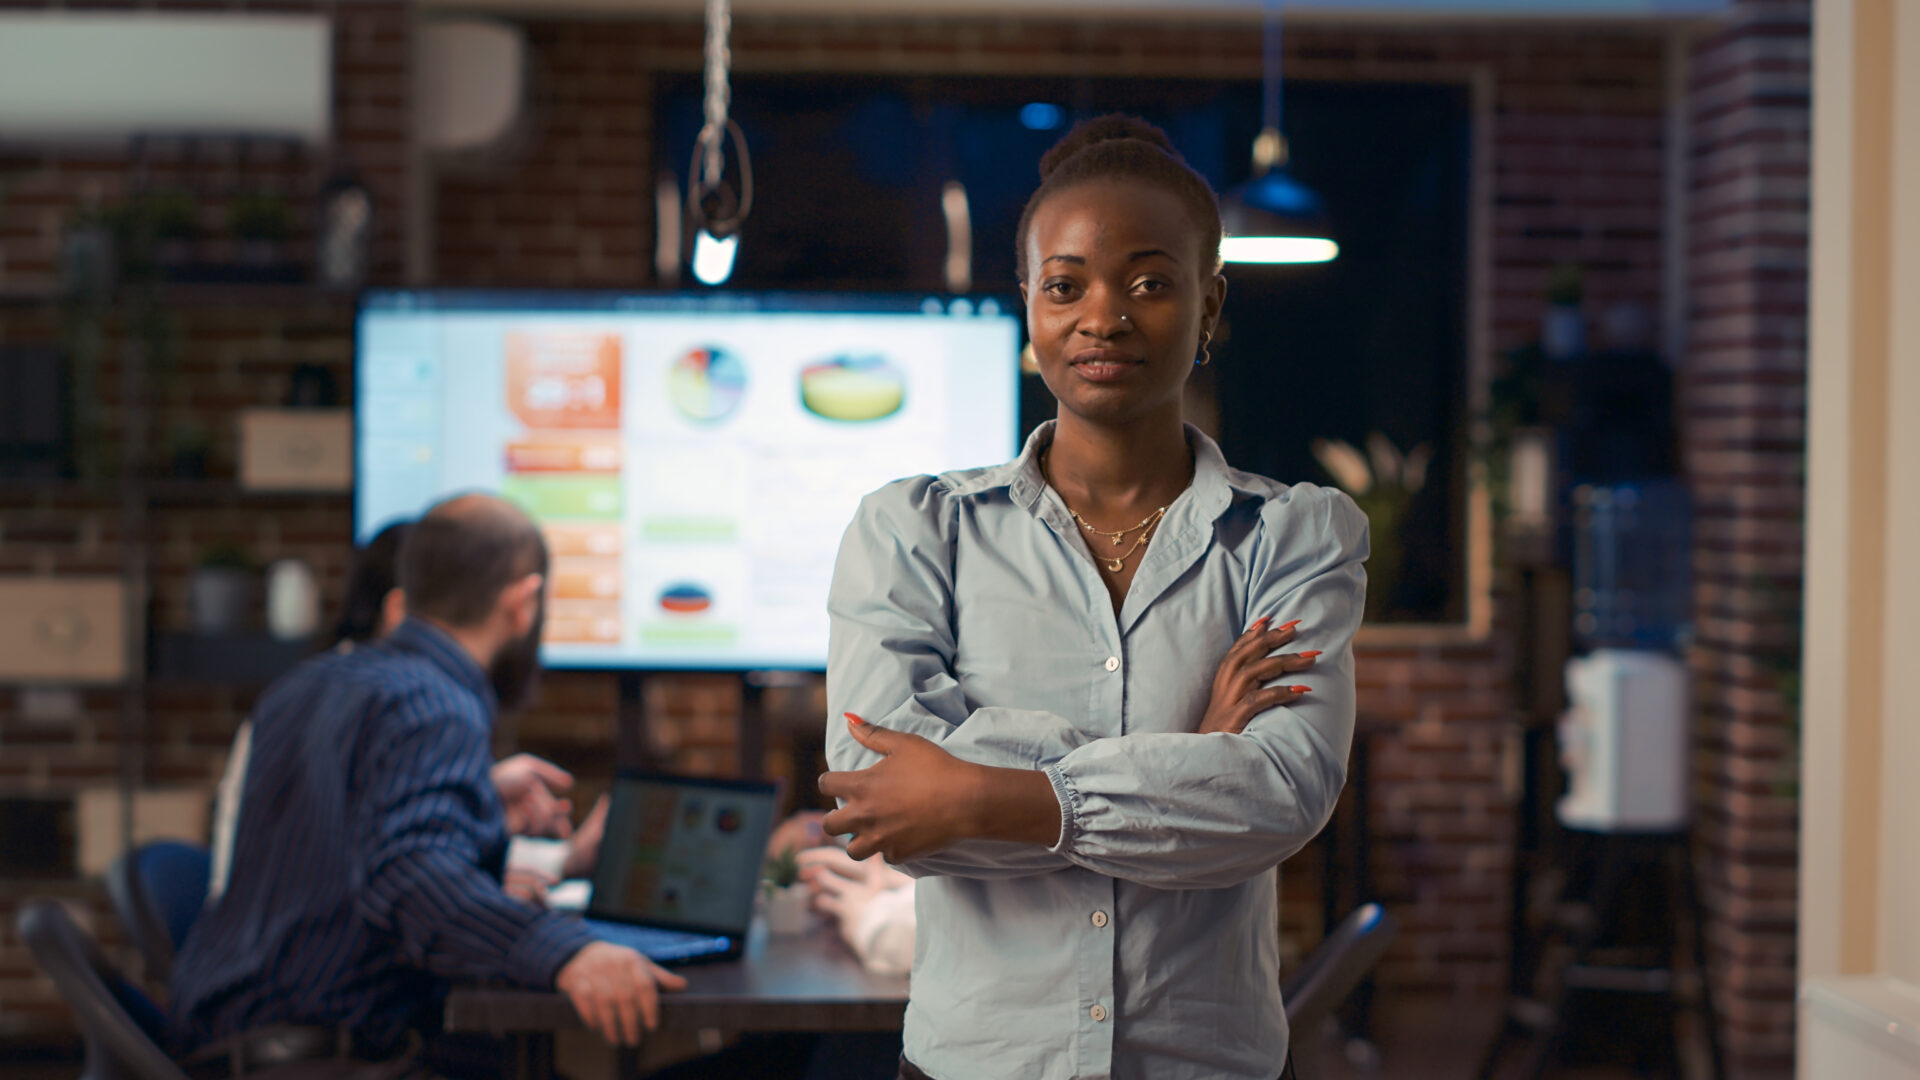 Smiling african american businesswoman crossing arms portrait, front view medium shot. Company employee standing in boardroom doorway in coworking space, coworkers presentation in background